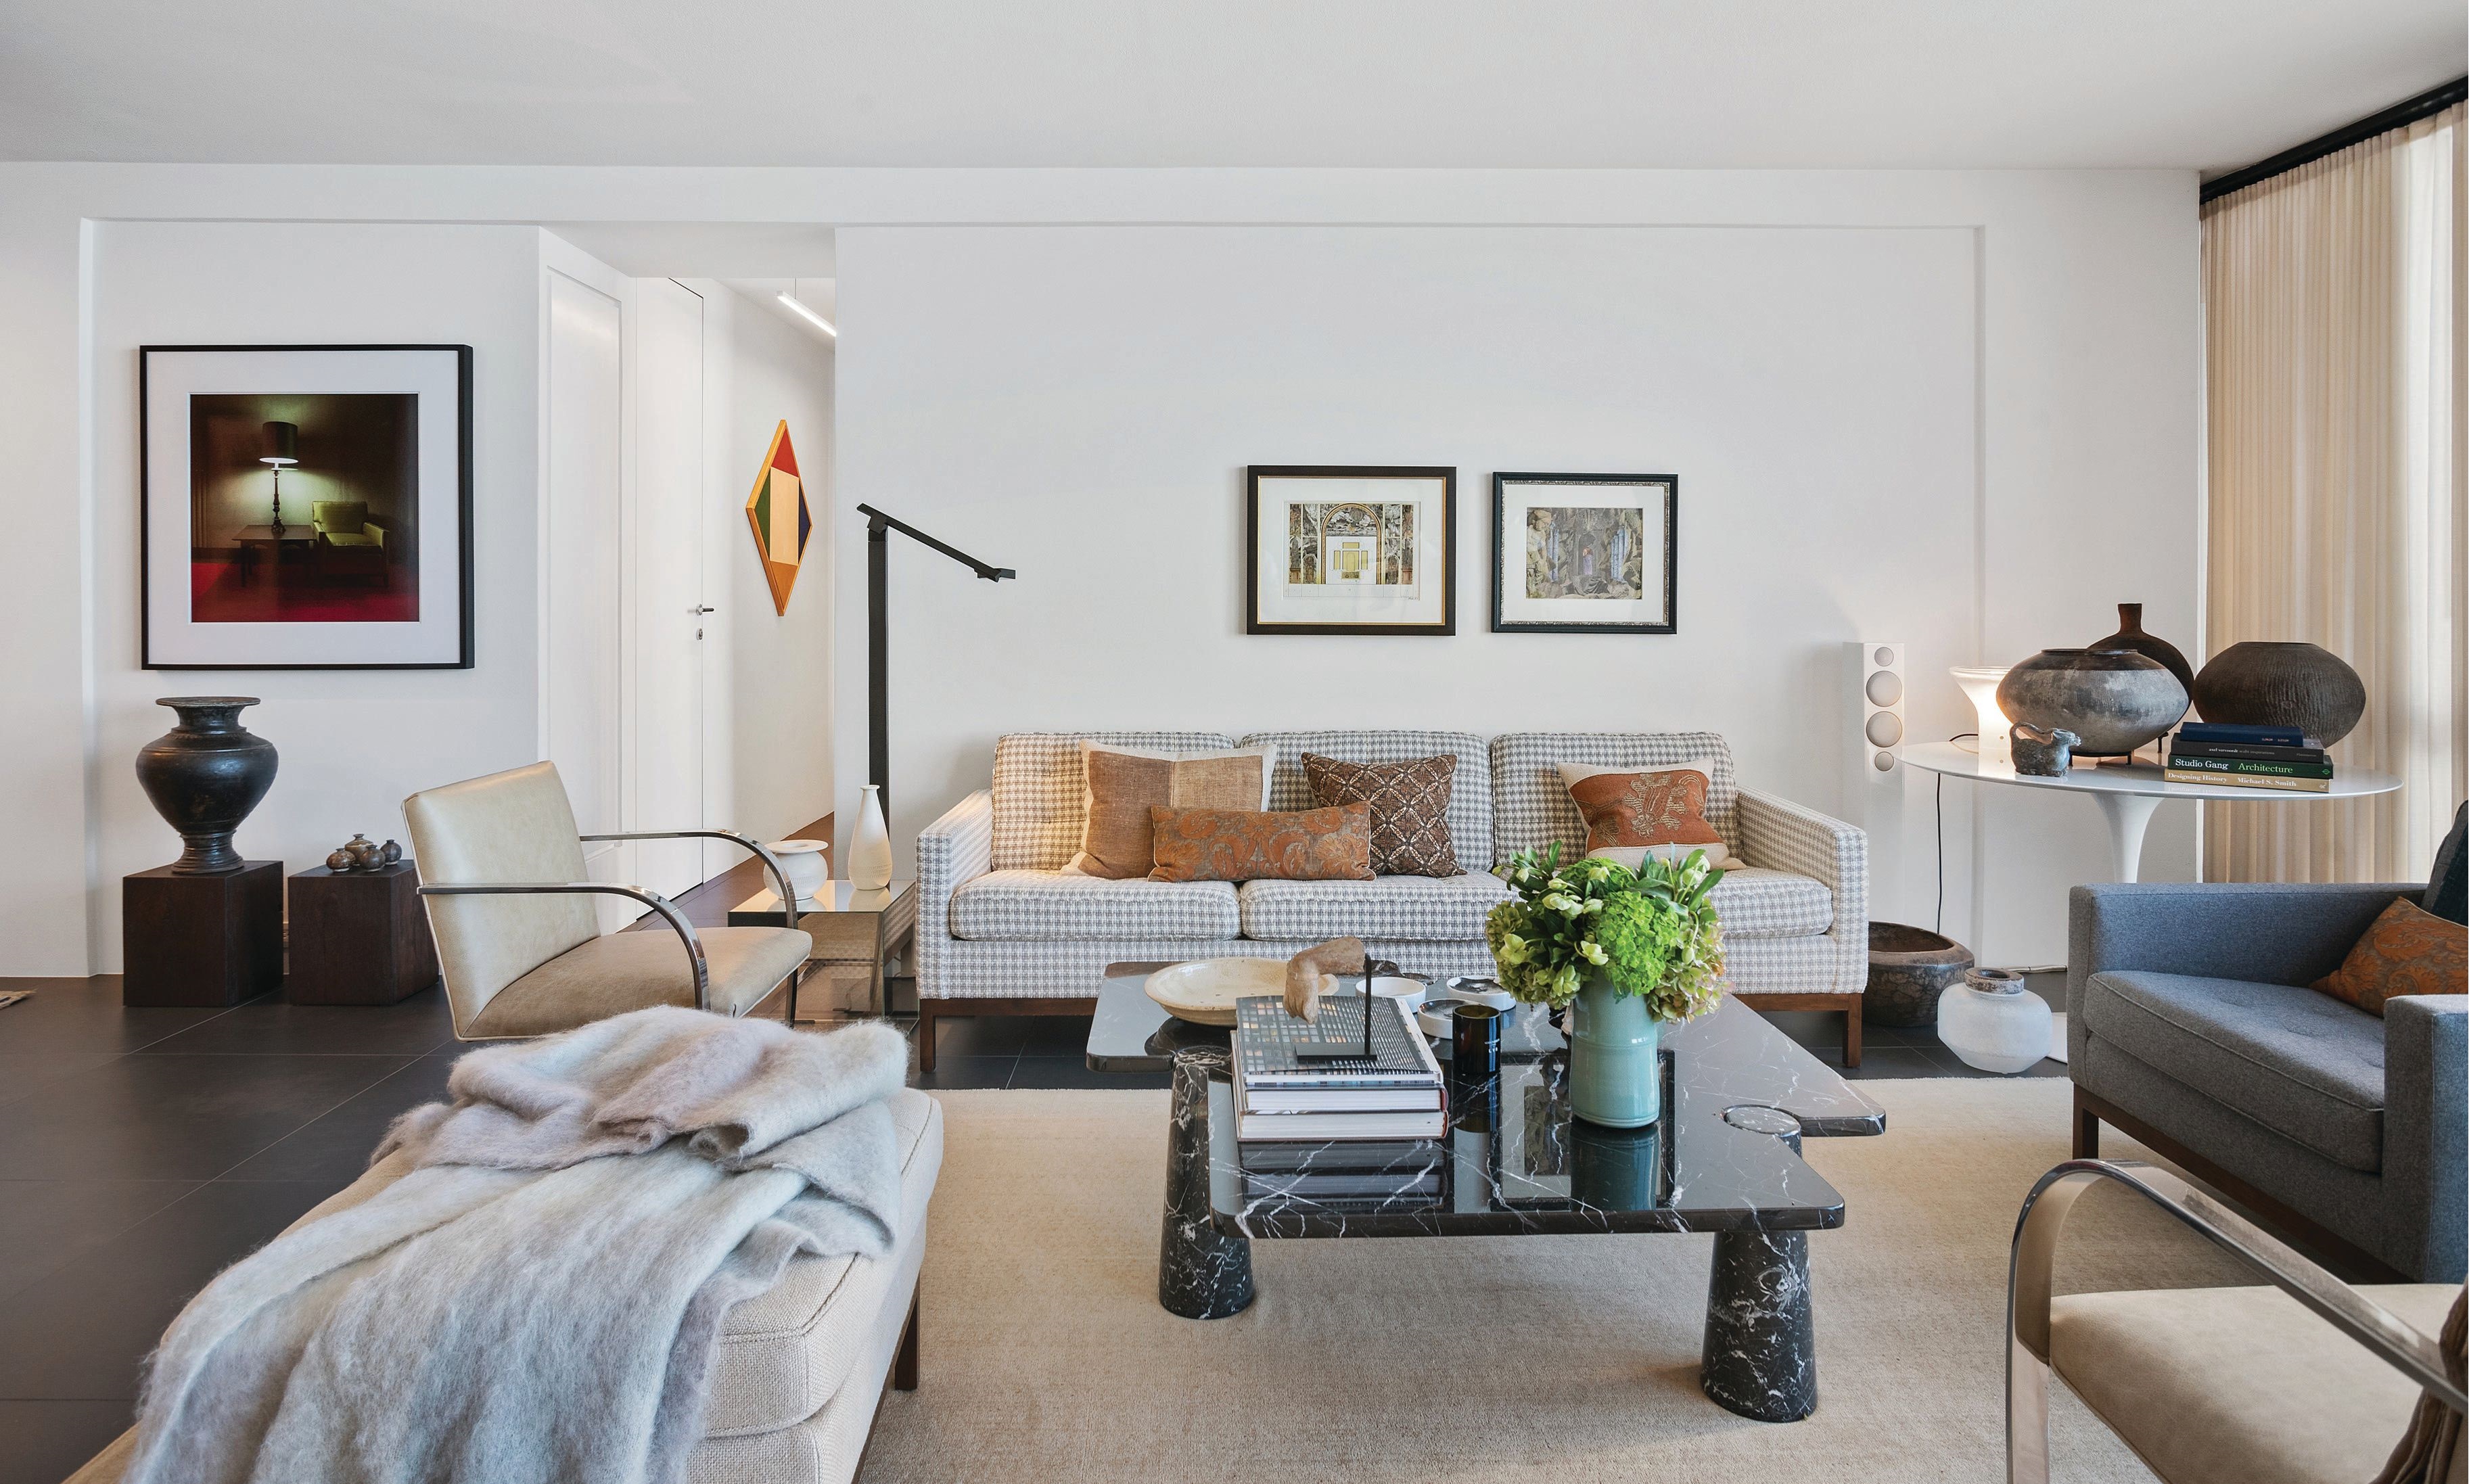 The living room serves as a sumptuous showcase of the client’s collection of art and antiques, including a vintage Angelo Mangiarotti coffee table; vintage Florence Knoll sofa, chair and ottoman; Glas Italia end table; and African pots sourced from Douglas Dawson Gallery. PHOTOGRAPHED BY PETRINI STUDIO